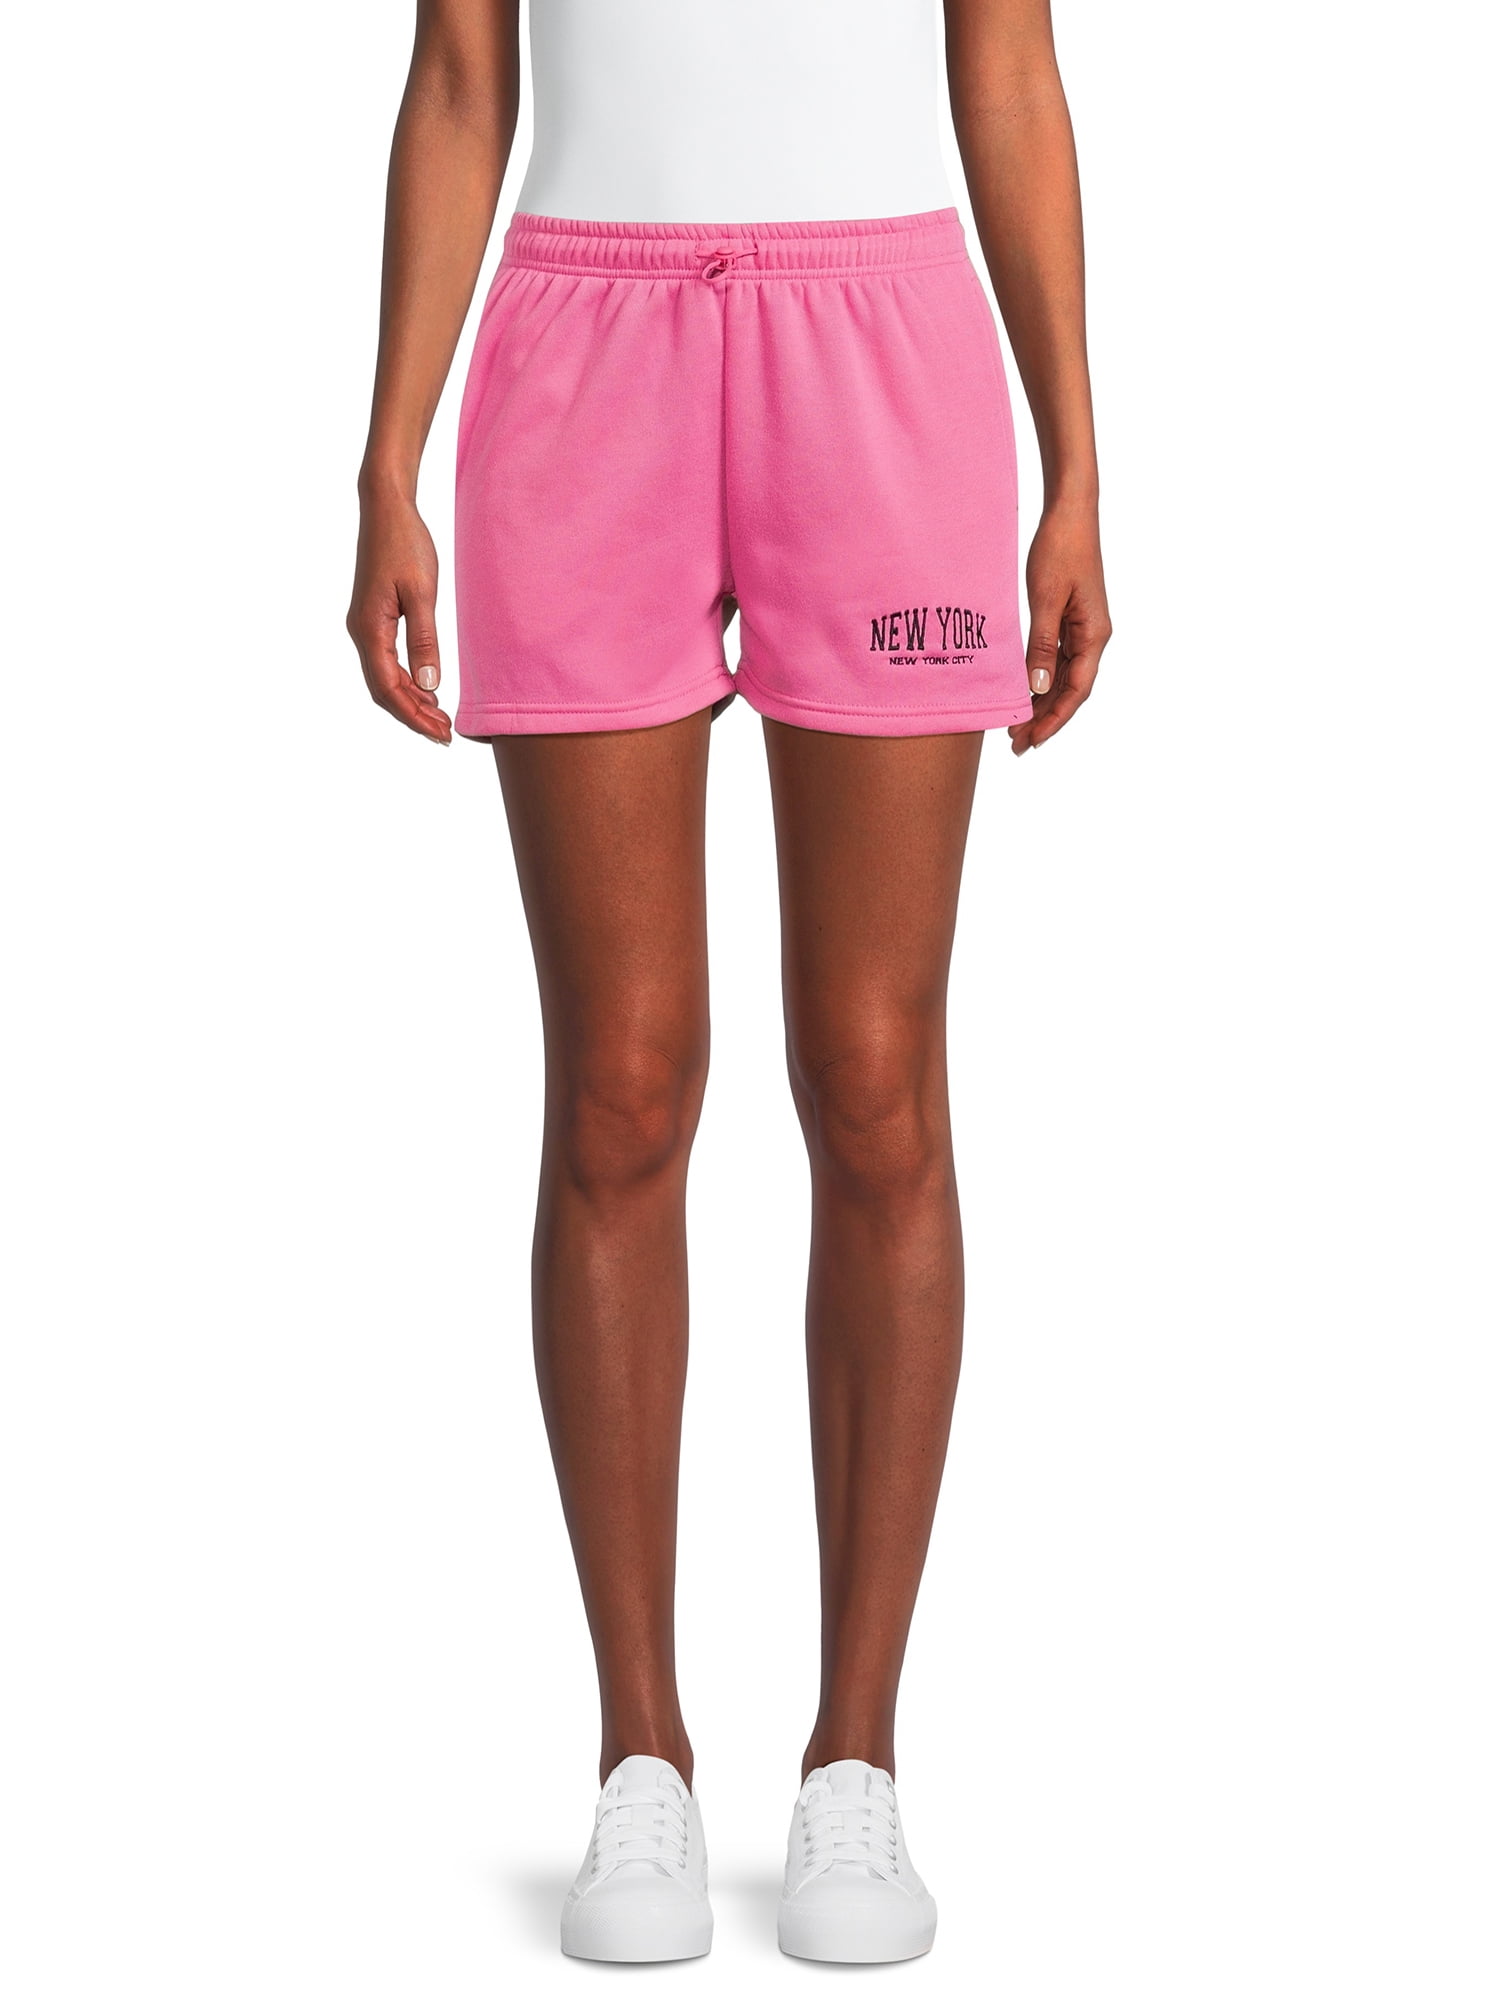 Liv & Lottie Juniors Embroidered Fleece Shorts with Pockets